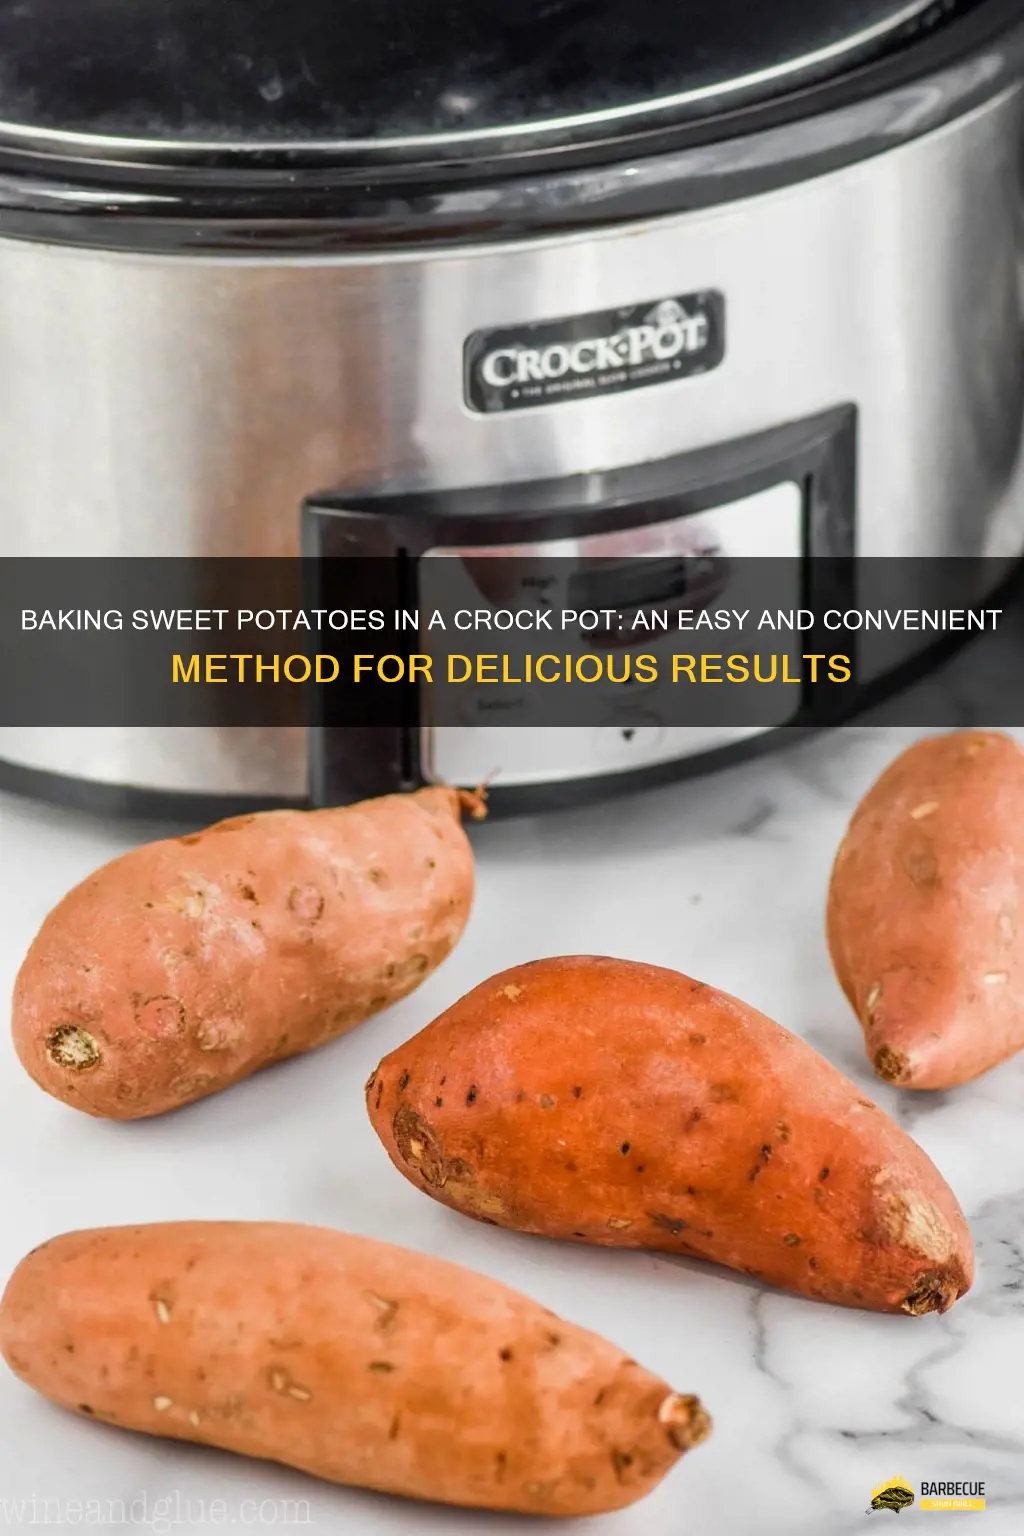 Baking Sweet Potatoes In A Crock Pot: An Easy And Convenient Method For ...